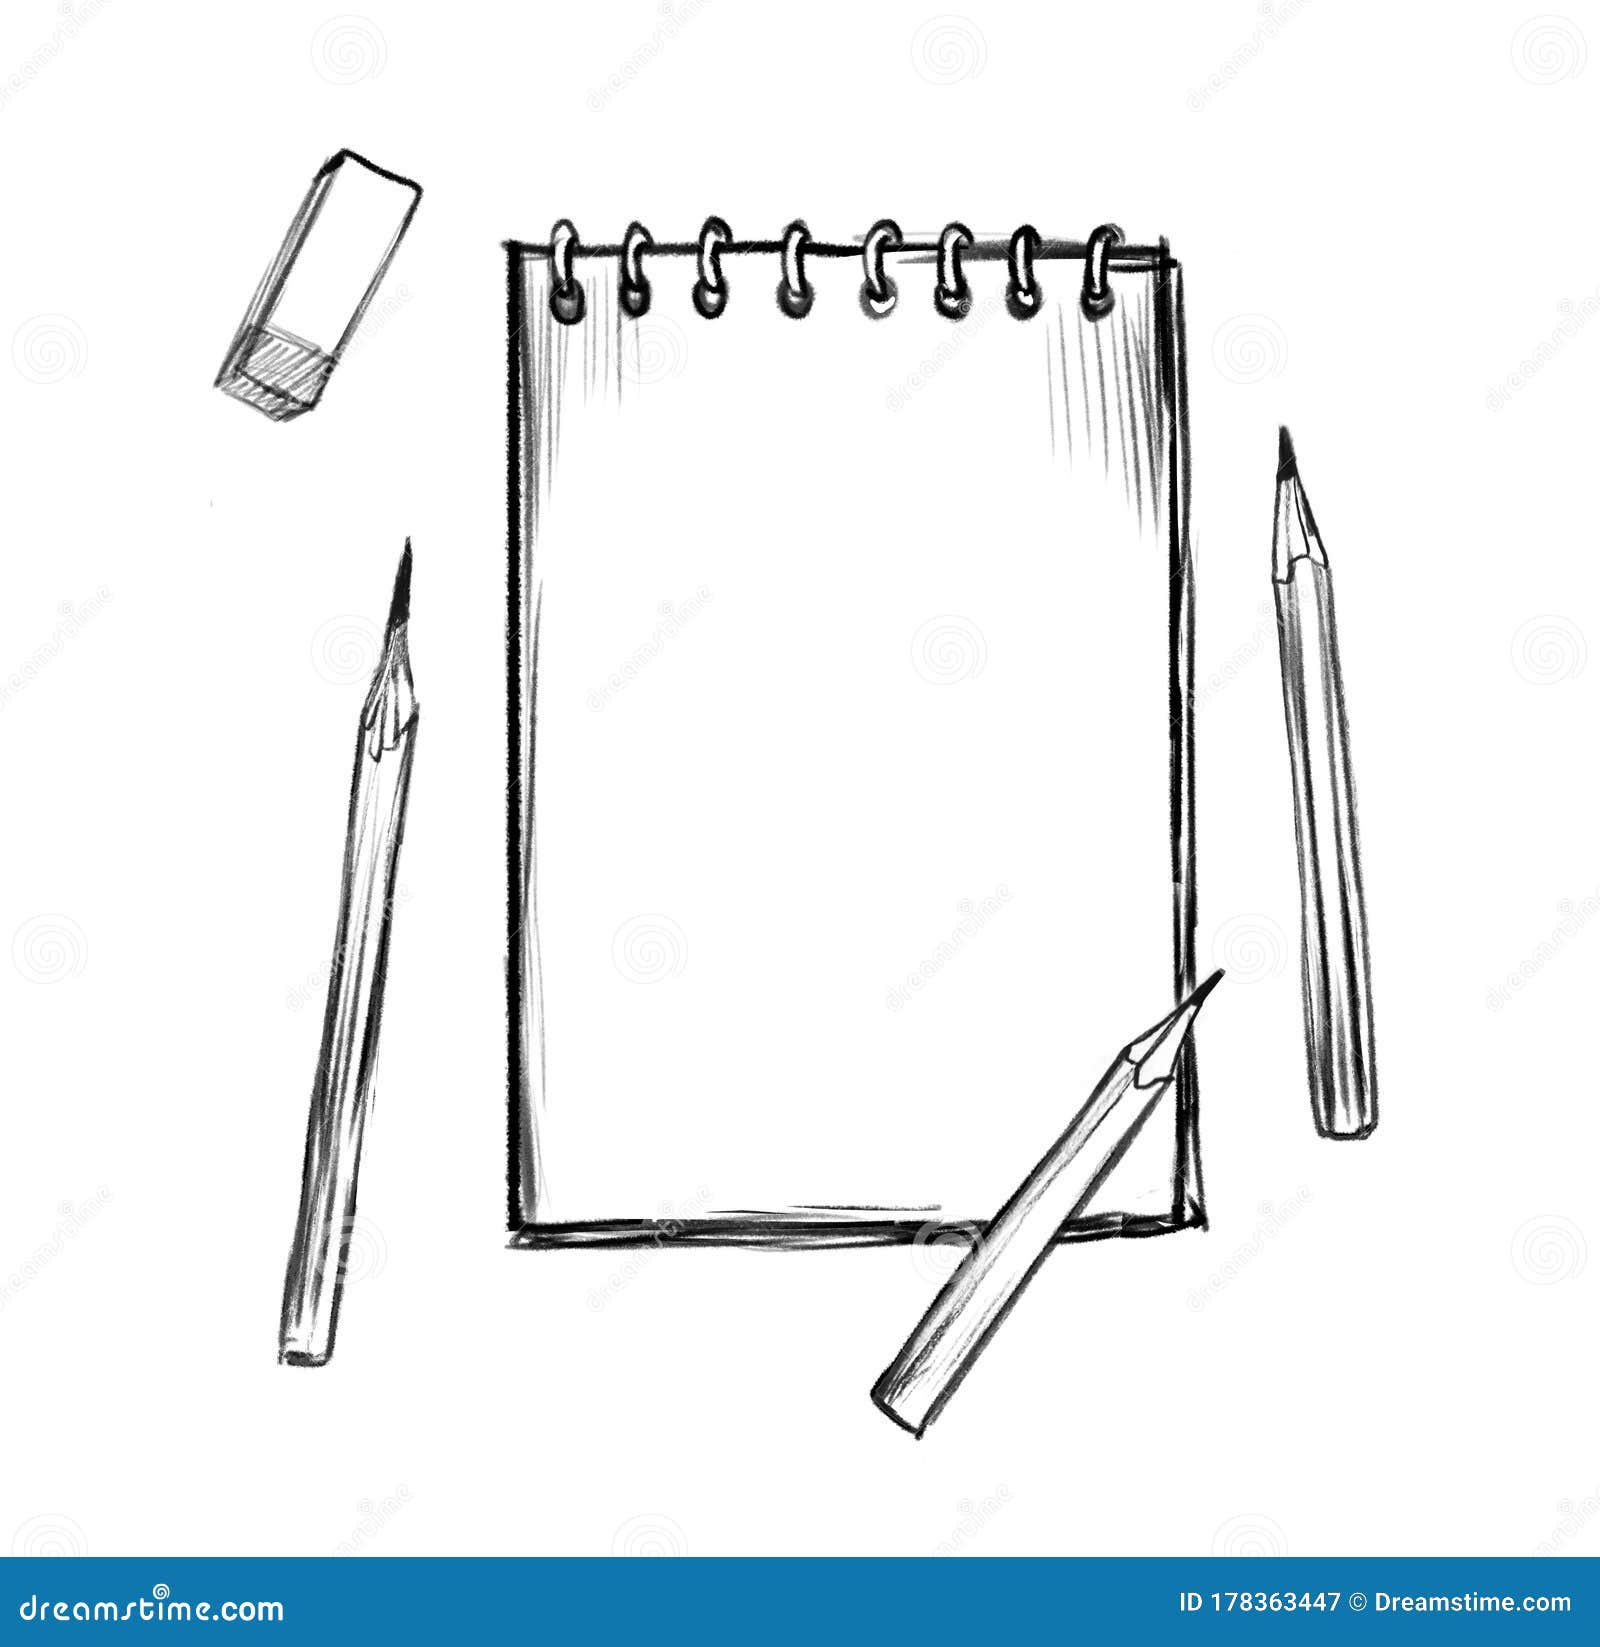 A Notepad for Drawing, Sketchbook, Pencils and an Eraser, the